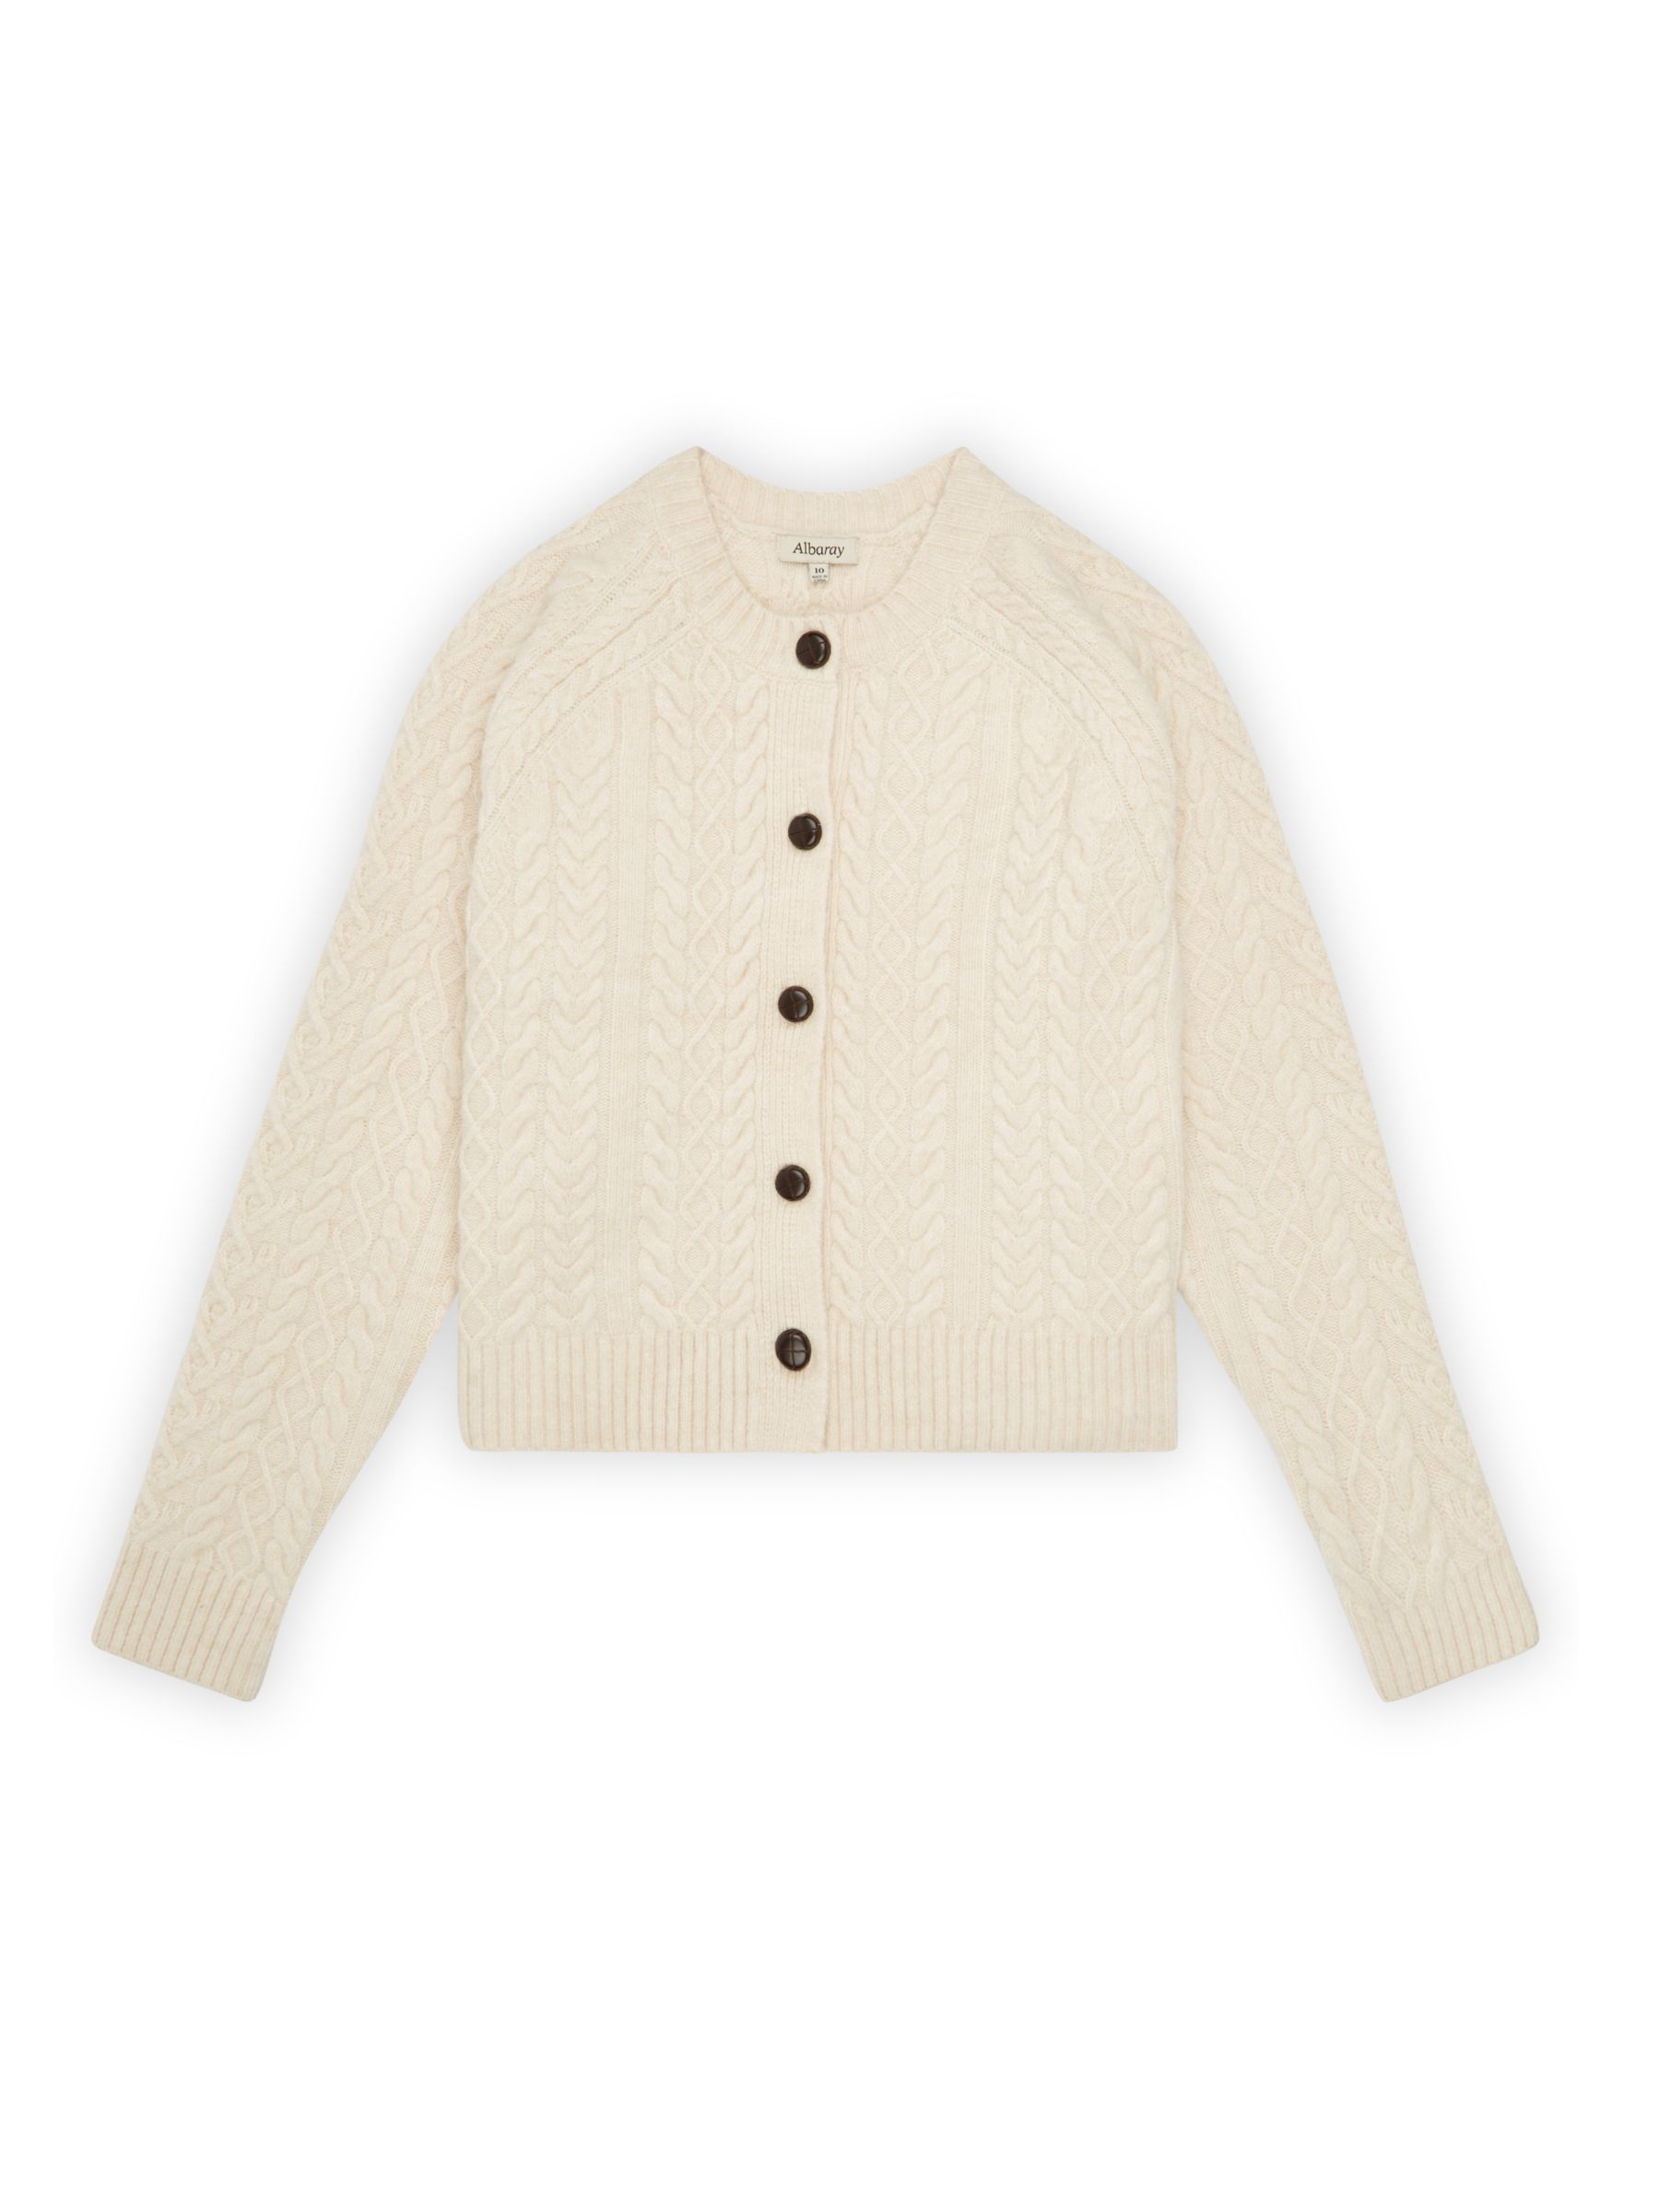 Albaray Relaxed Cable Knit Cardigan, Cream at John Lewis & Partners